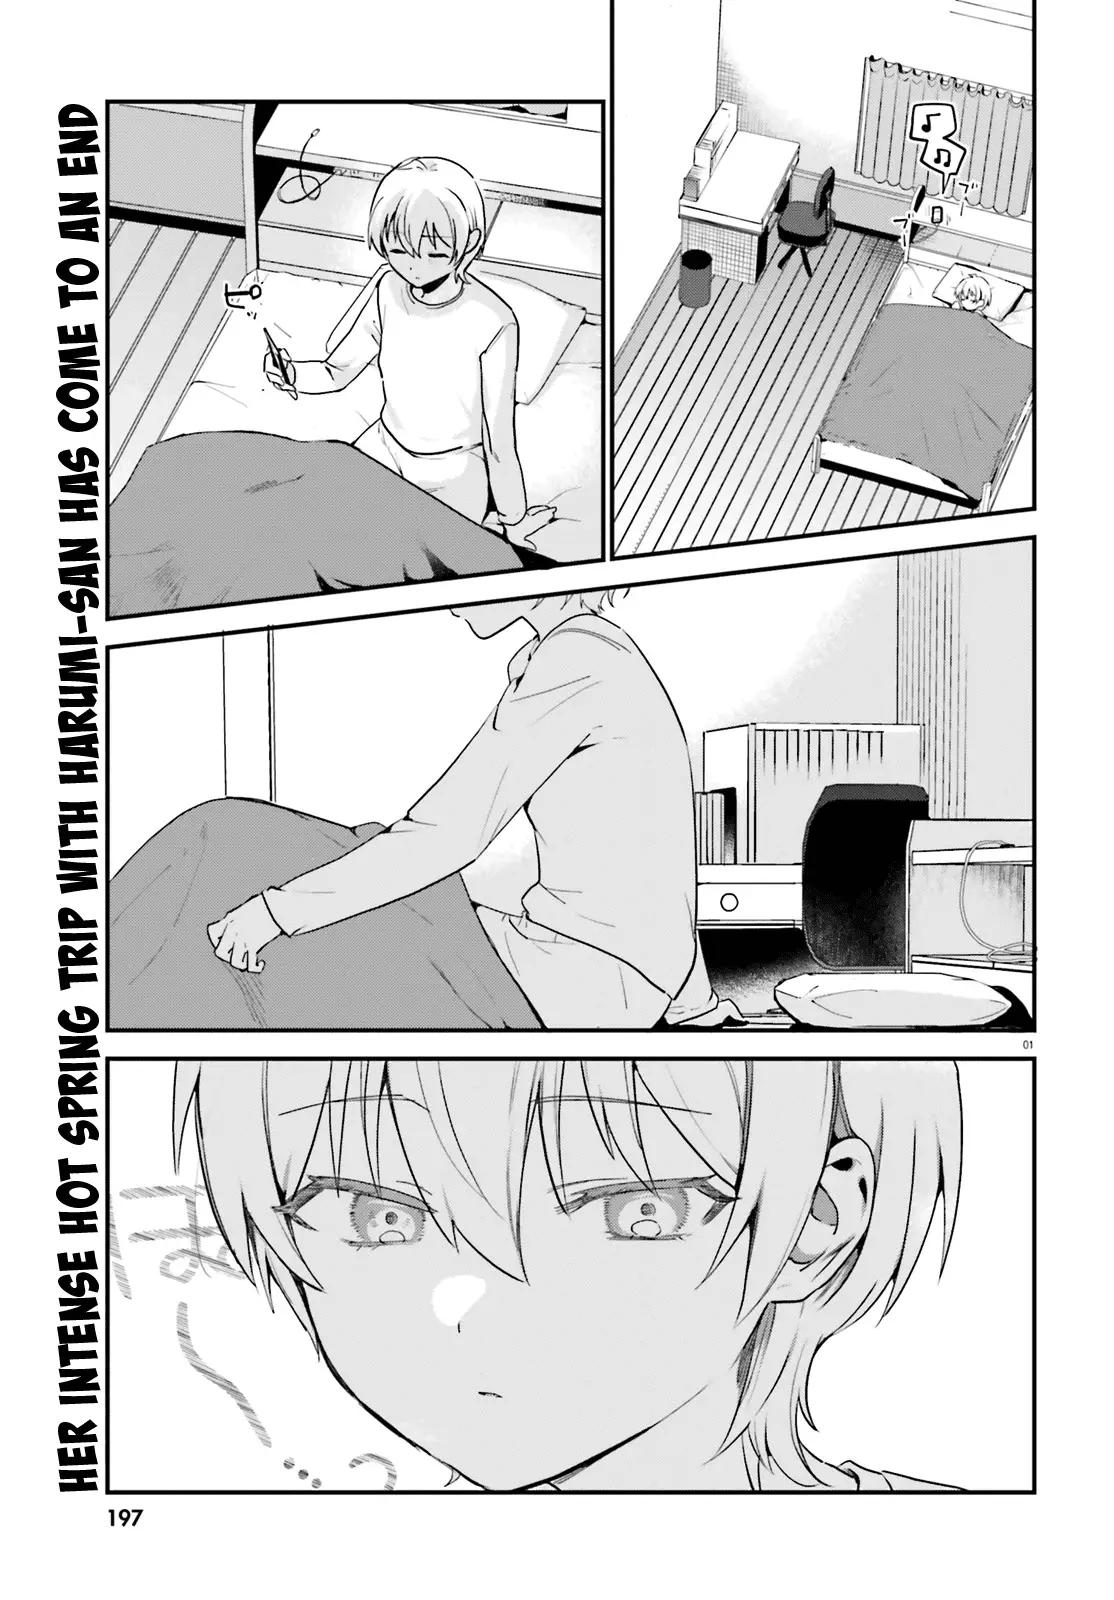 I Like Oppai Best In The World! - 59 page 1-ccb3c687